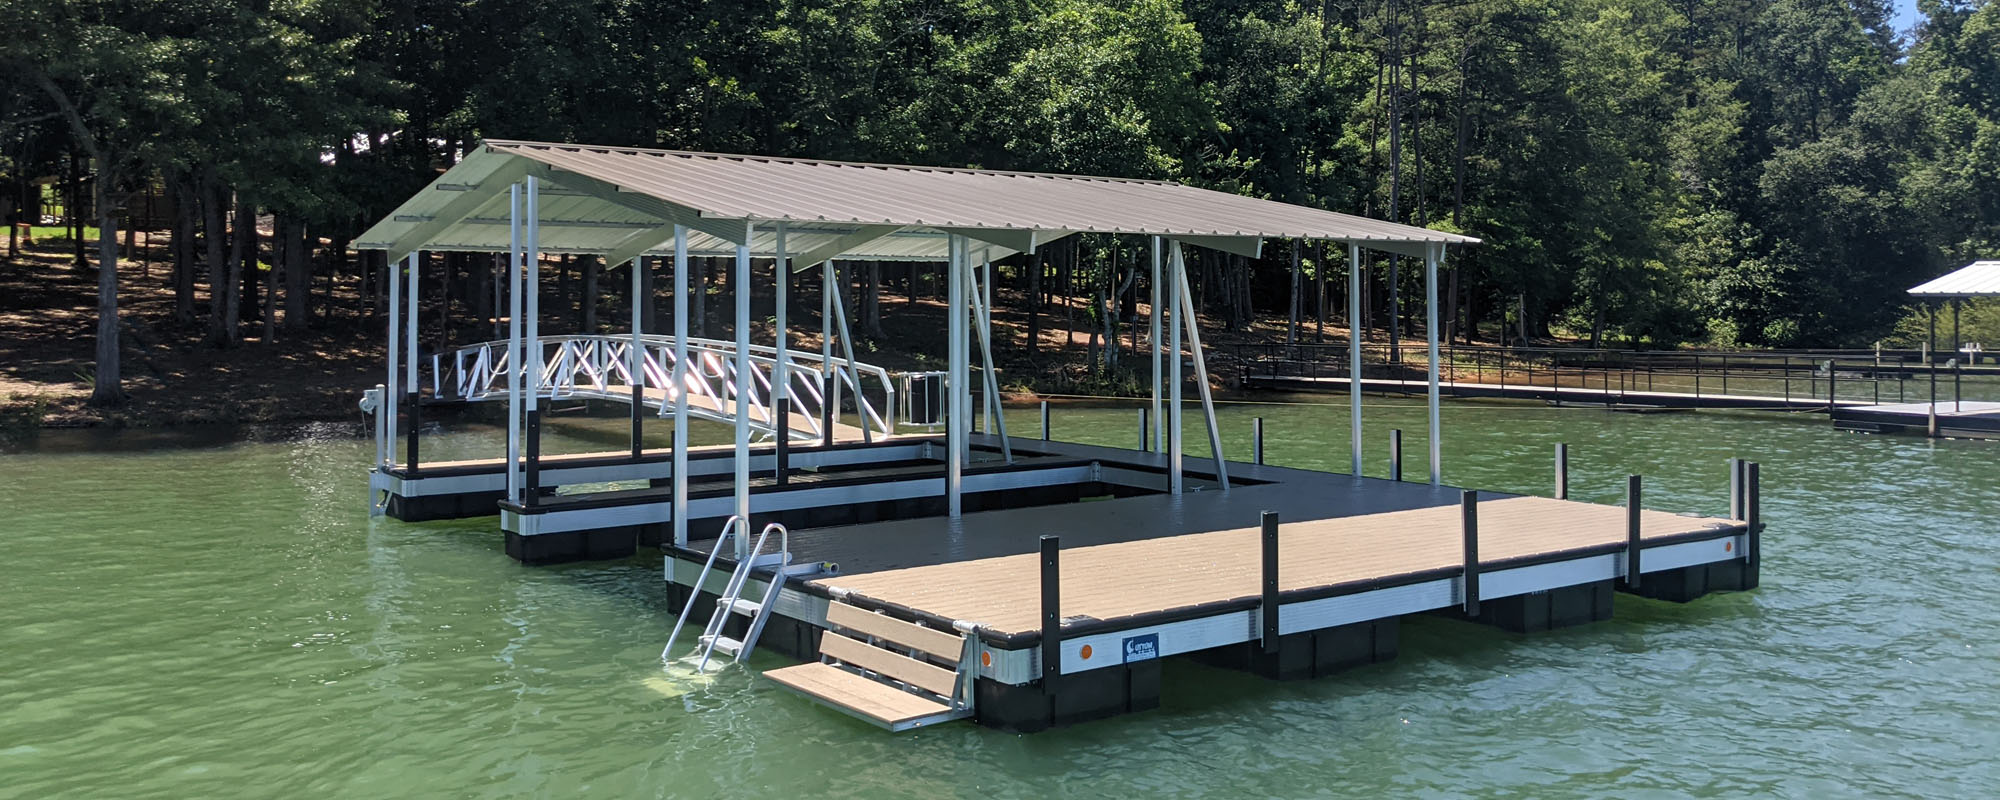 Custom Dock Systems Dock Fabrication, Design, Build and Construction of Marine Aluminum and Steel Docks on Lake Hartwell in Anderson, SC